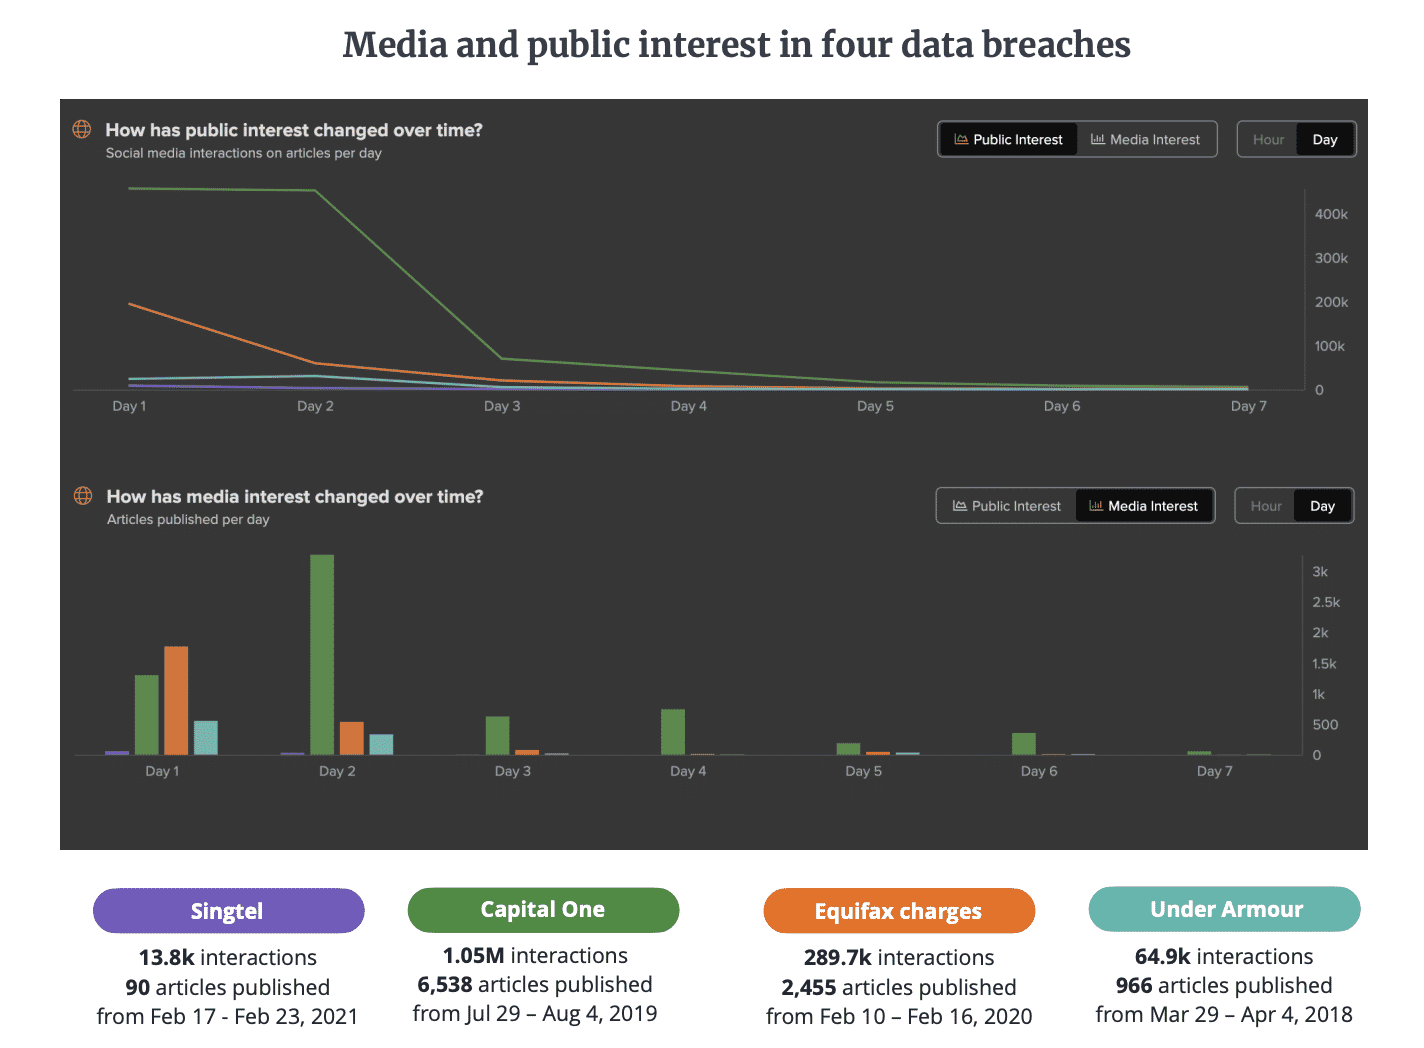 A look at the comparative media and public interest in five major data breaches, showing Capital One as the one that received the most attention